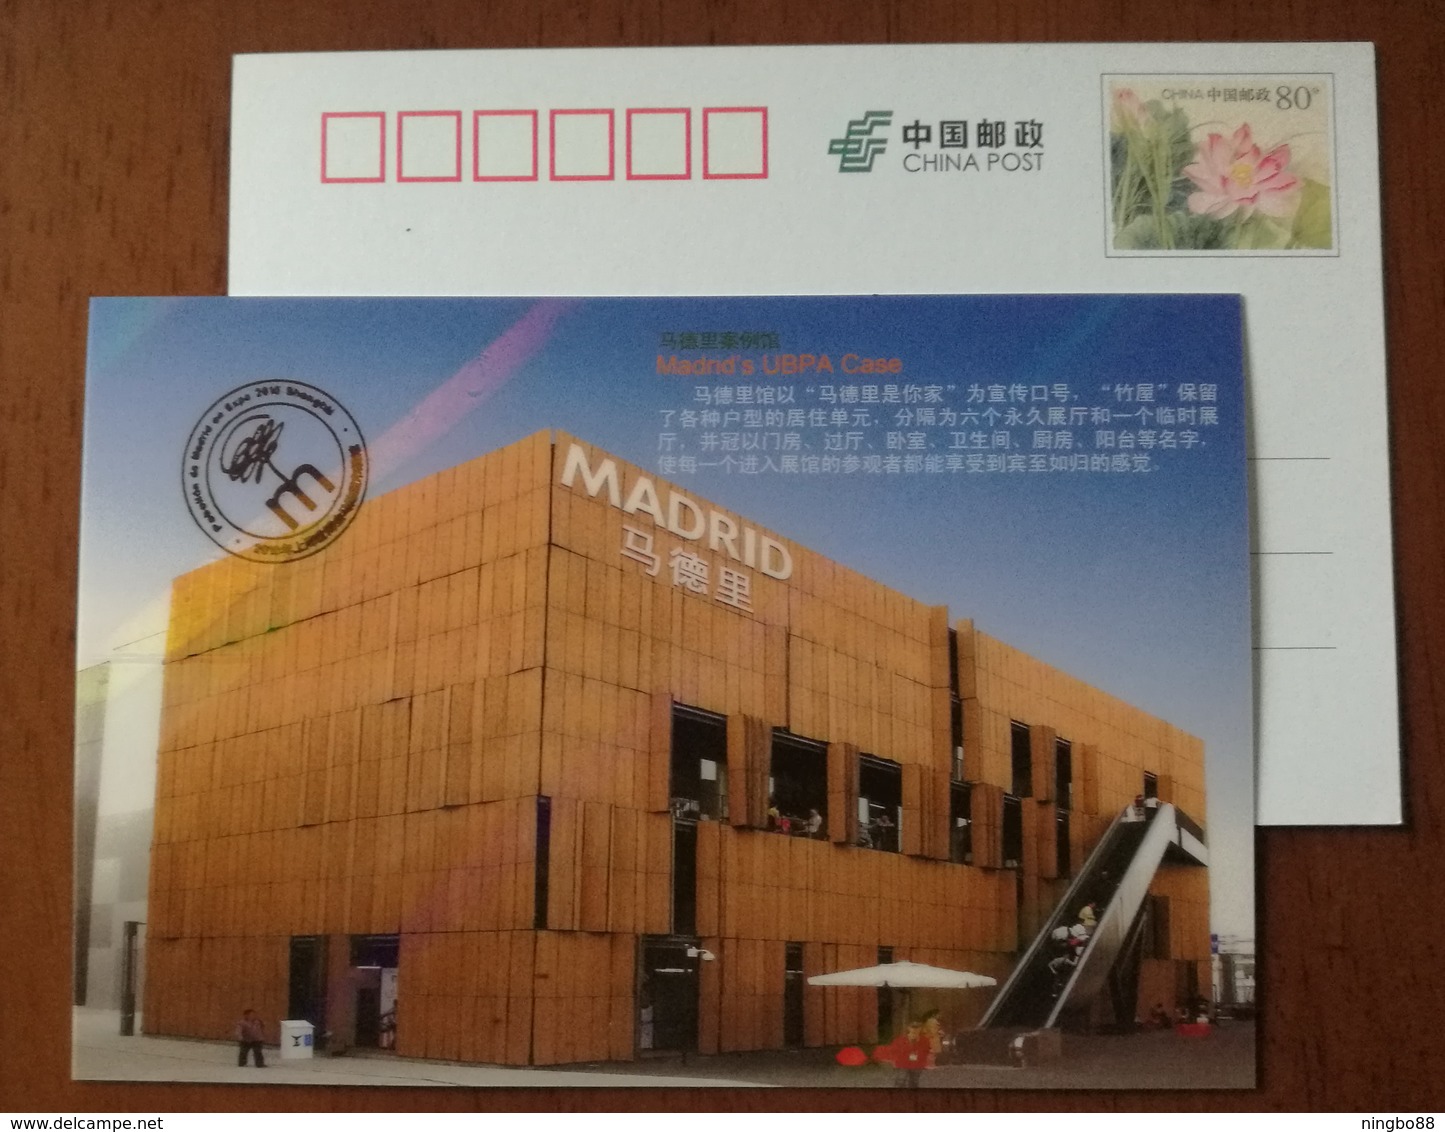 Madrid's UBPA Case Pavilion Architecture,China 2010 Expo 2010 Shanghai World Exposition Advertising Pre-stamped Card - 2010 – Shanghai (Chine)